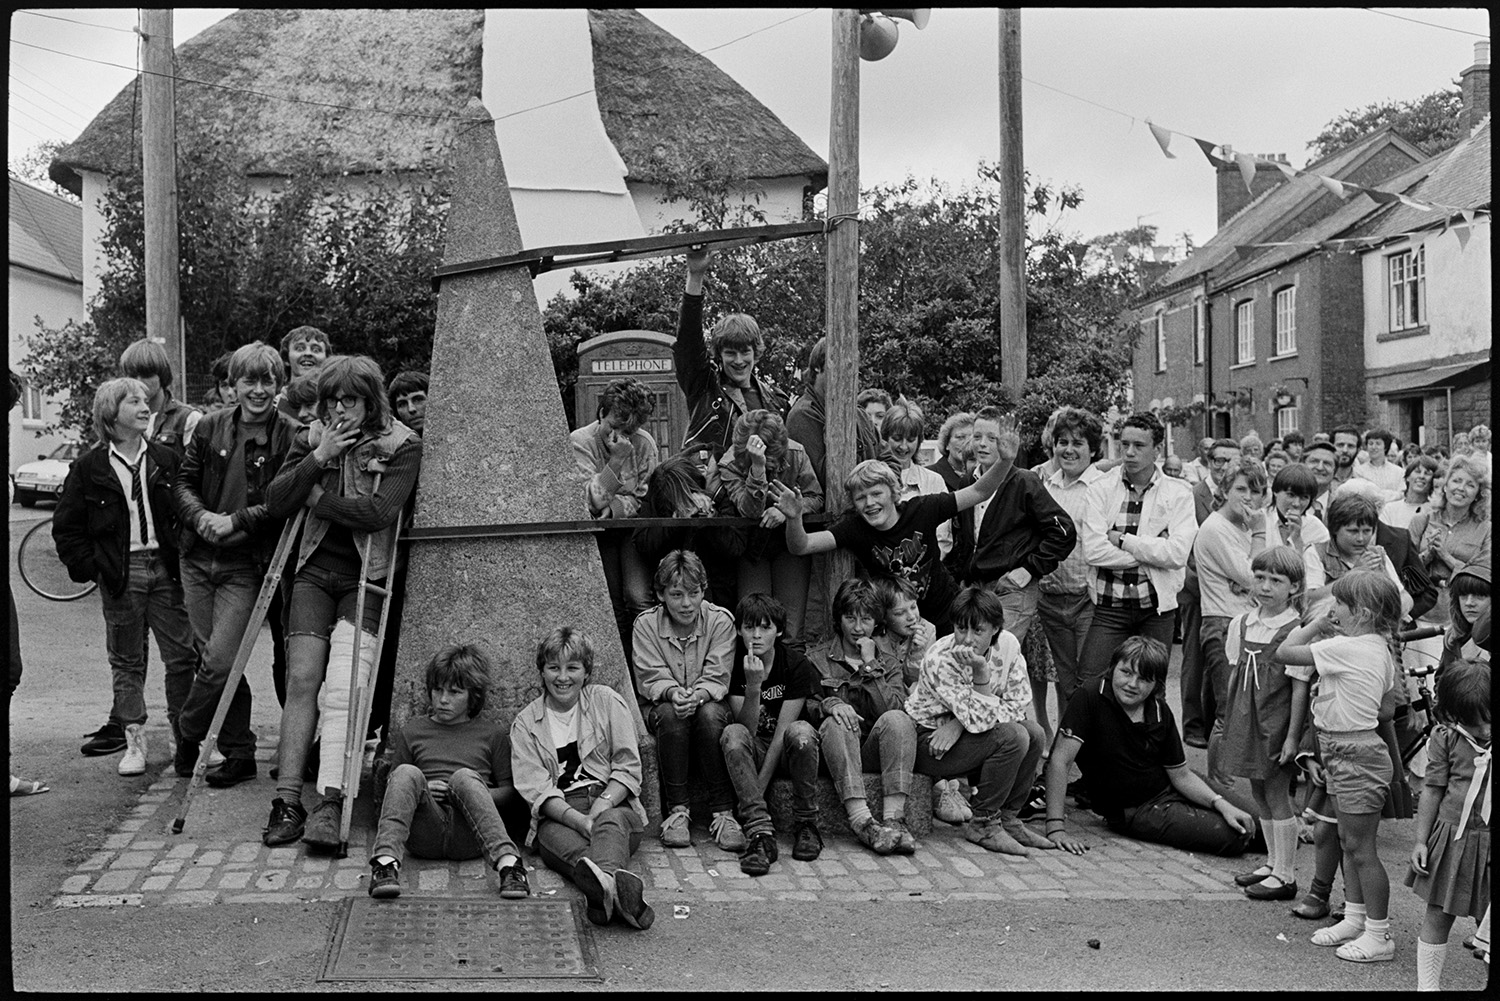 Fair Queen and attendants in village square, spectators waiting around. Photographer. 
[Children and teenagers gathered around the village pump in Winkleigh square waiting for the start of Winkleigh Fair. One teenager has a pair of crutches and is smoking.]